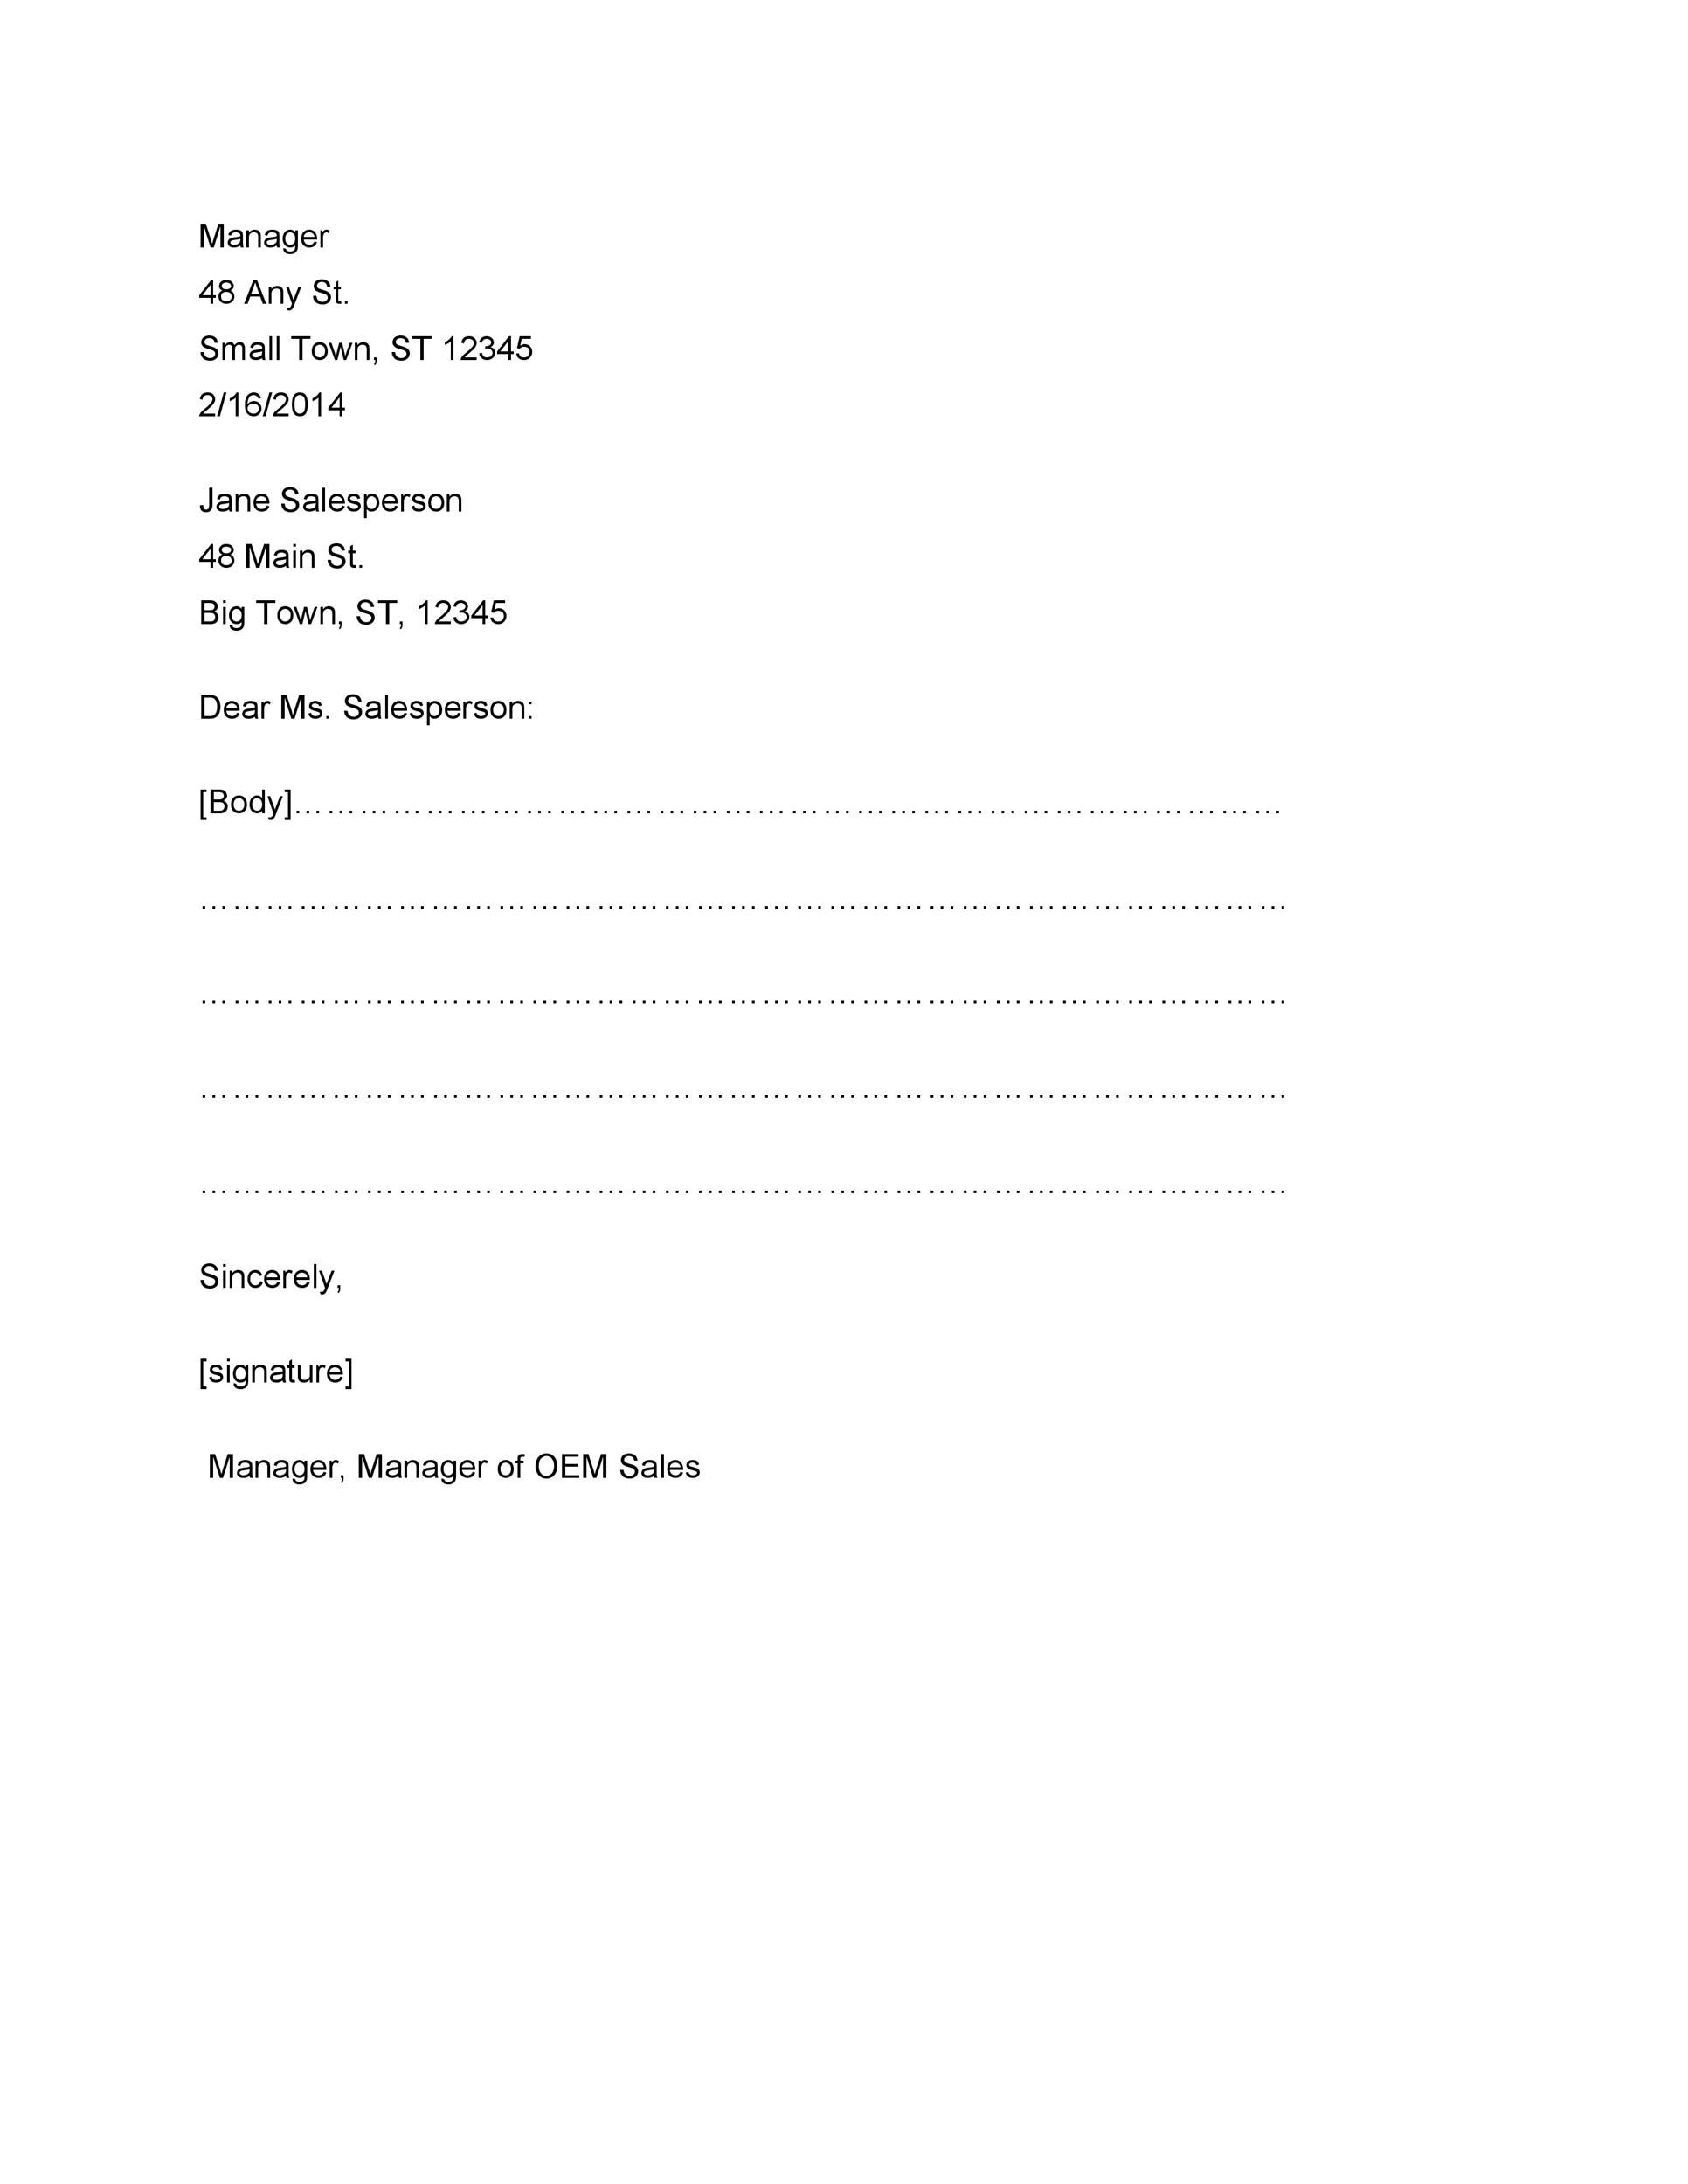 35 Formal / Business Letter Format Templates & Examples ᐅ TemplateLab